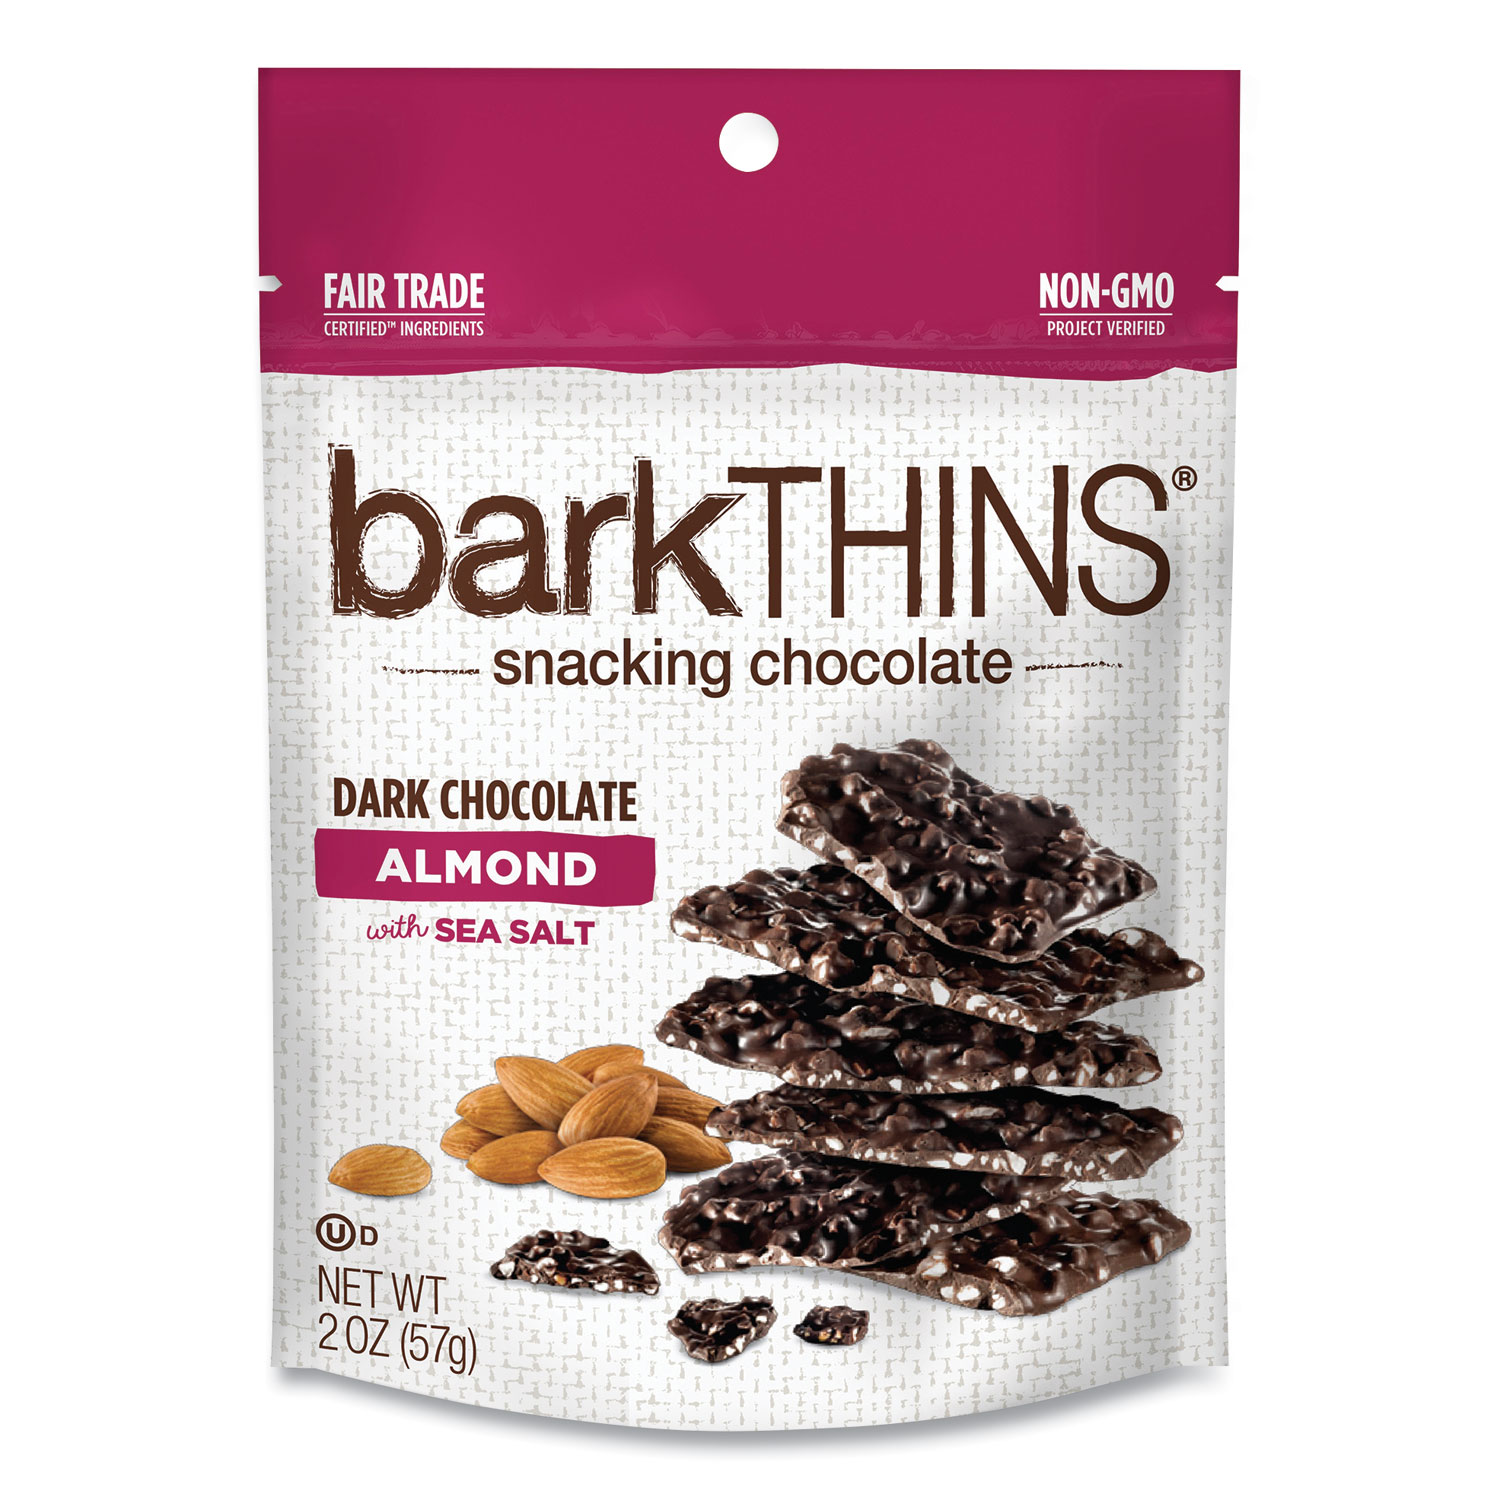  barkTHINS 2042 Snacking Chocolate, Dark Chocolate Almond with Sea Salt, 2 oz Bag, 8/Carton, Free Delivery in 1-4 Business Days (GRR24600297) 